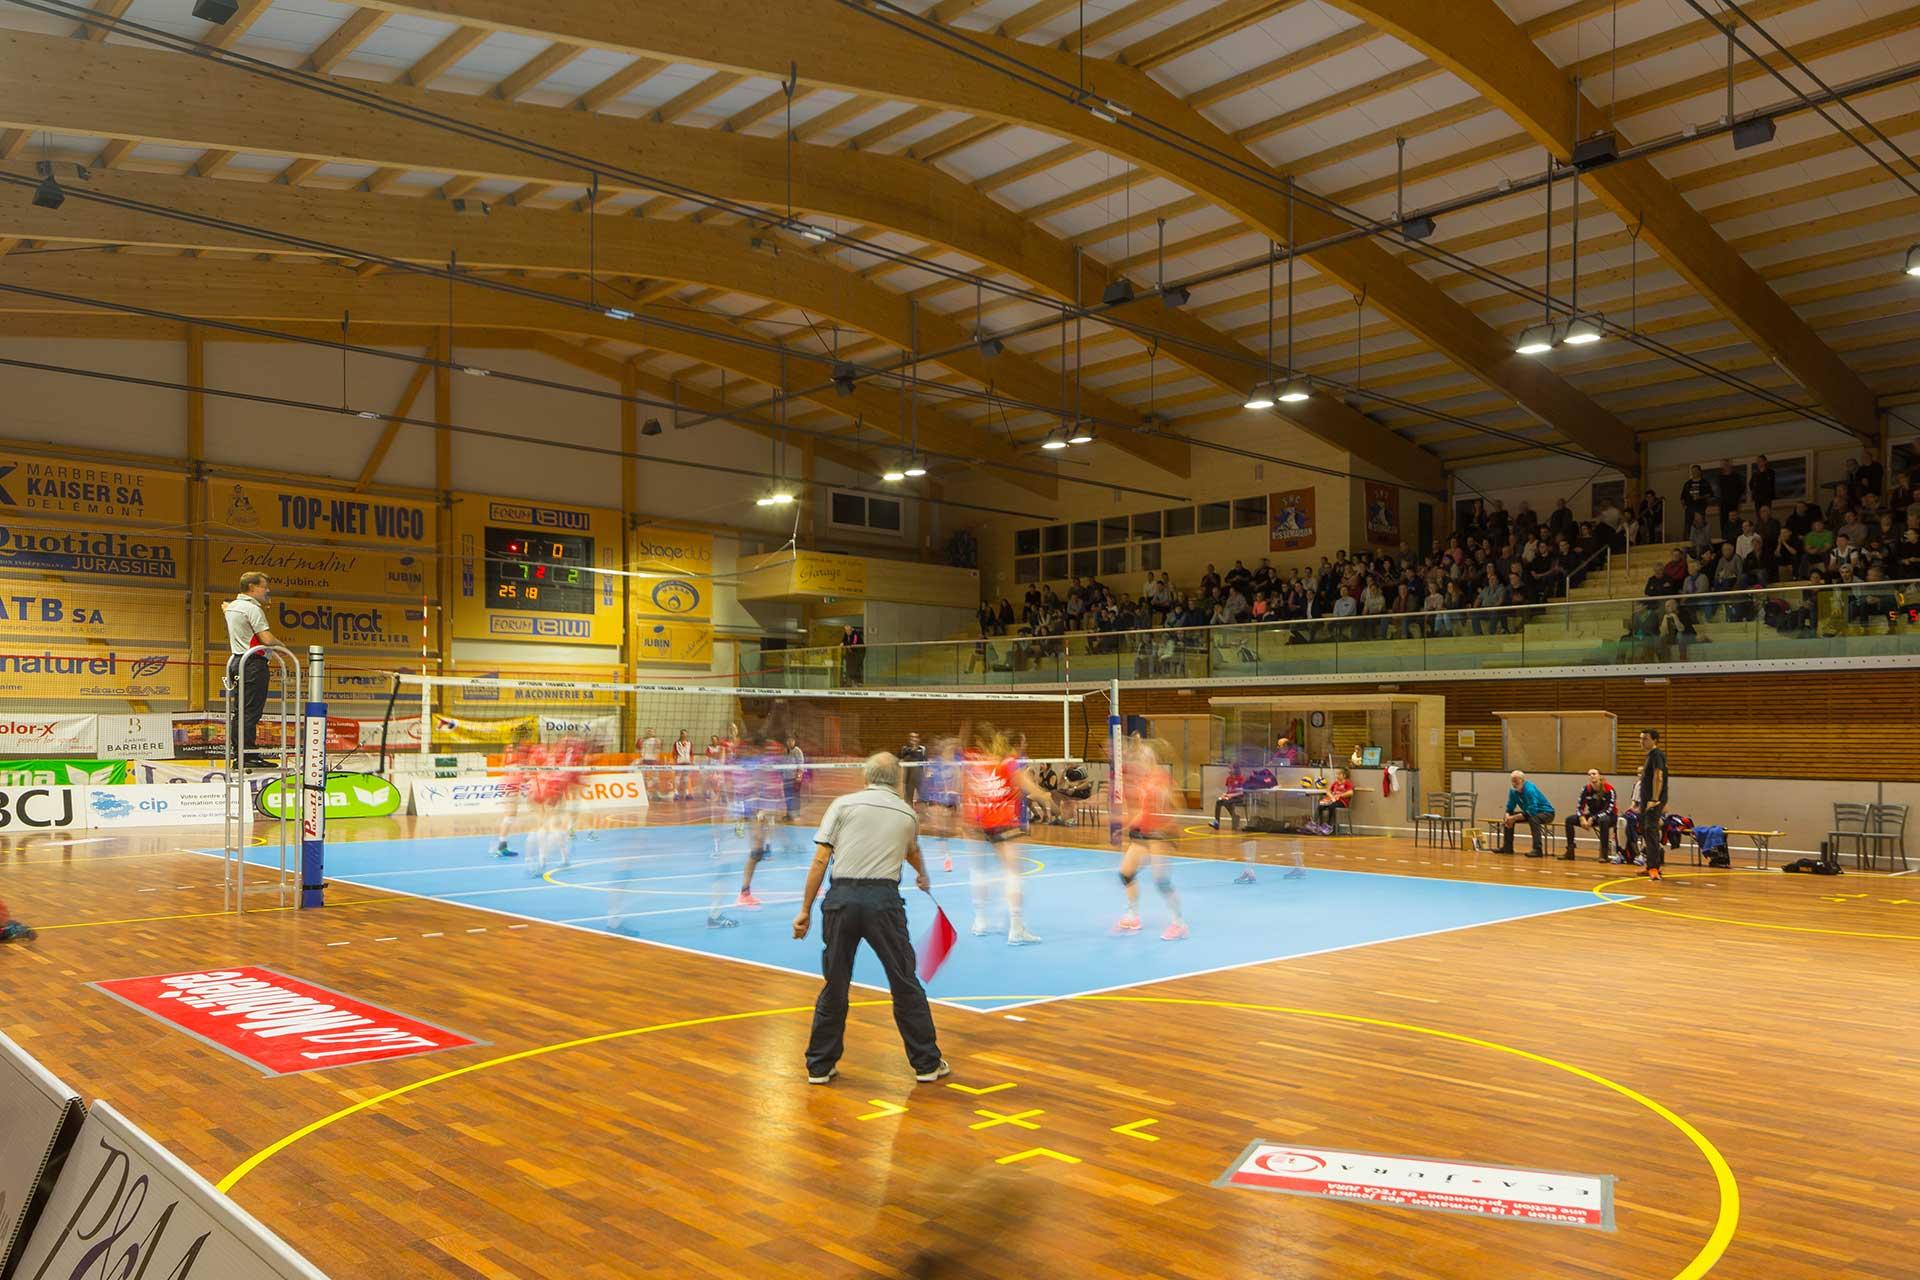 OMNIstar delivers the necessary light quality and visual comfort for Rossemaison sports hall